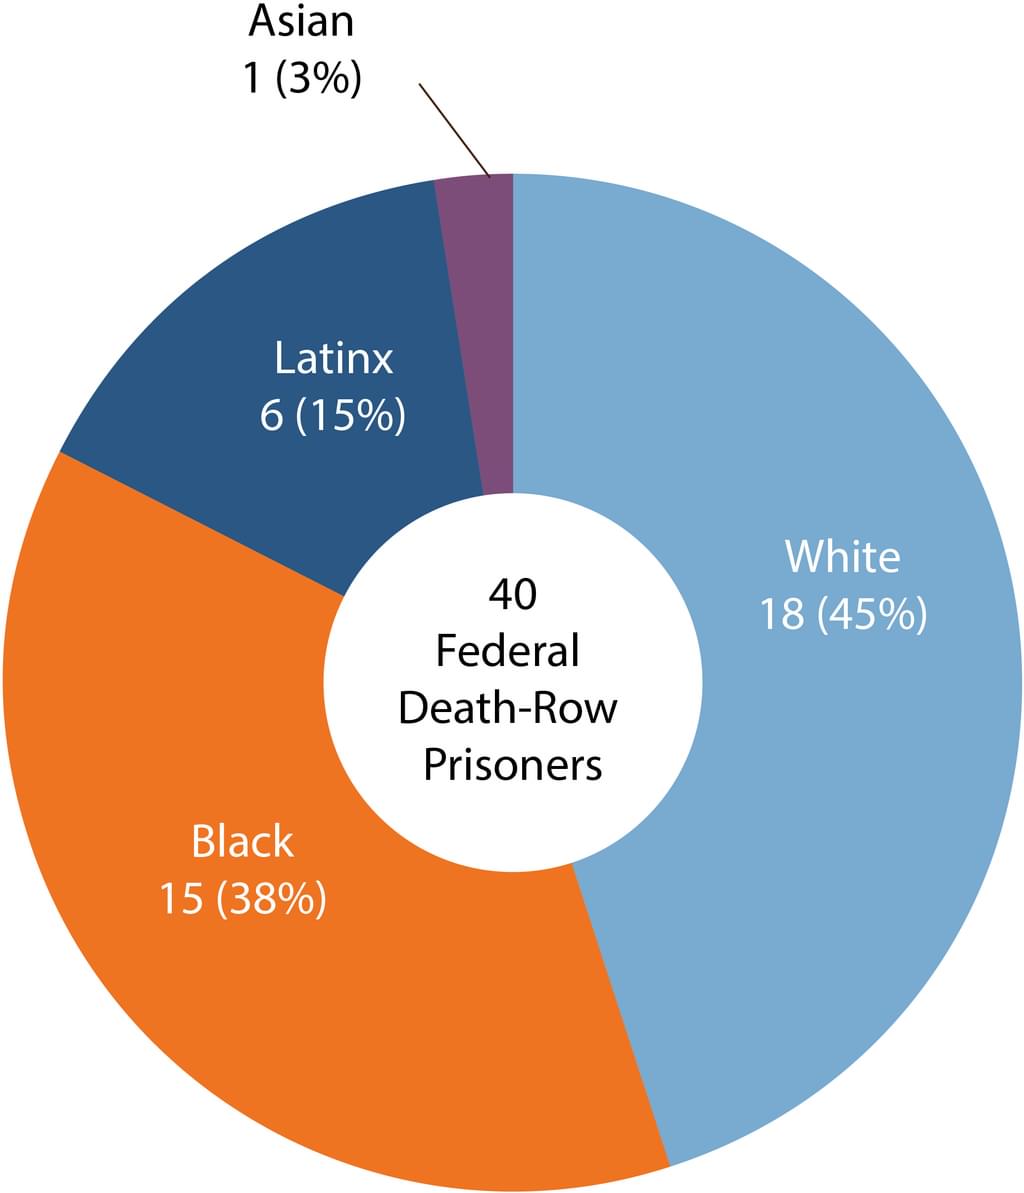 Pie graph showing 41 total federal death-row prisoners, of which 18 (45%) are white, 15 (38%) are black, 6 (15%) are Latinx, and 1 (3%) are Asian